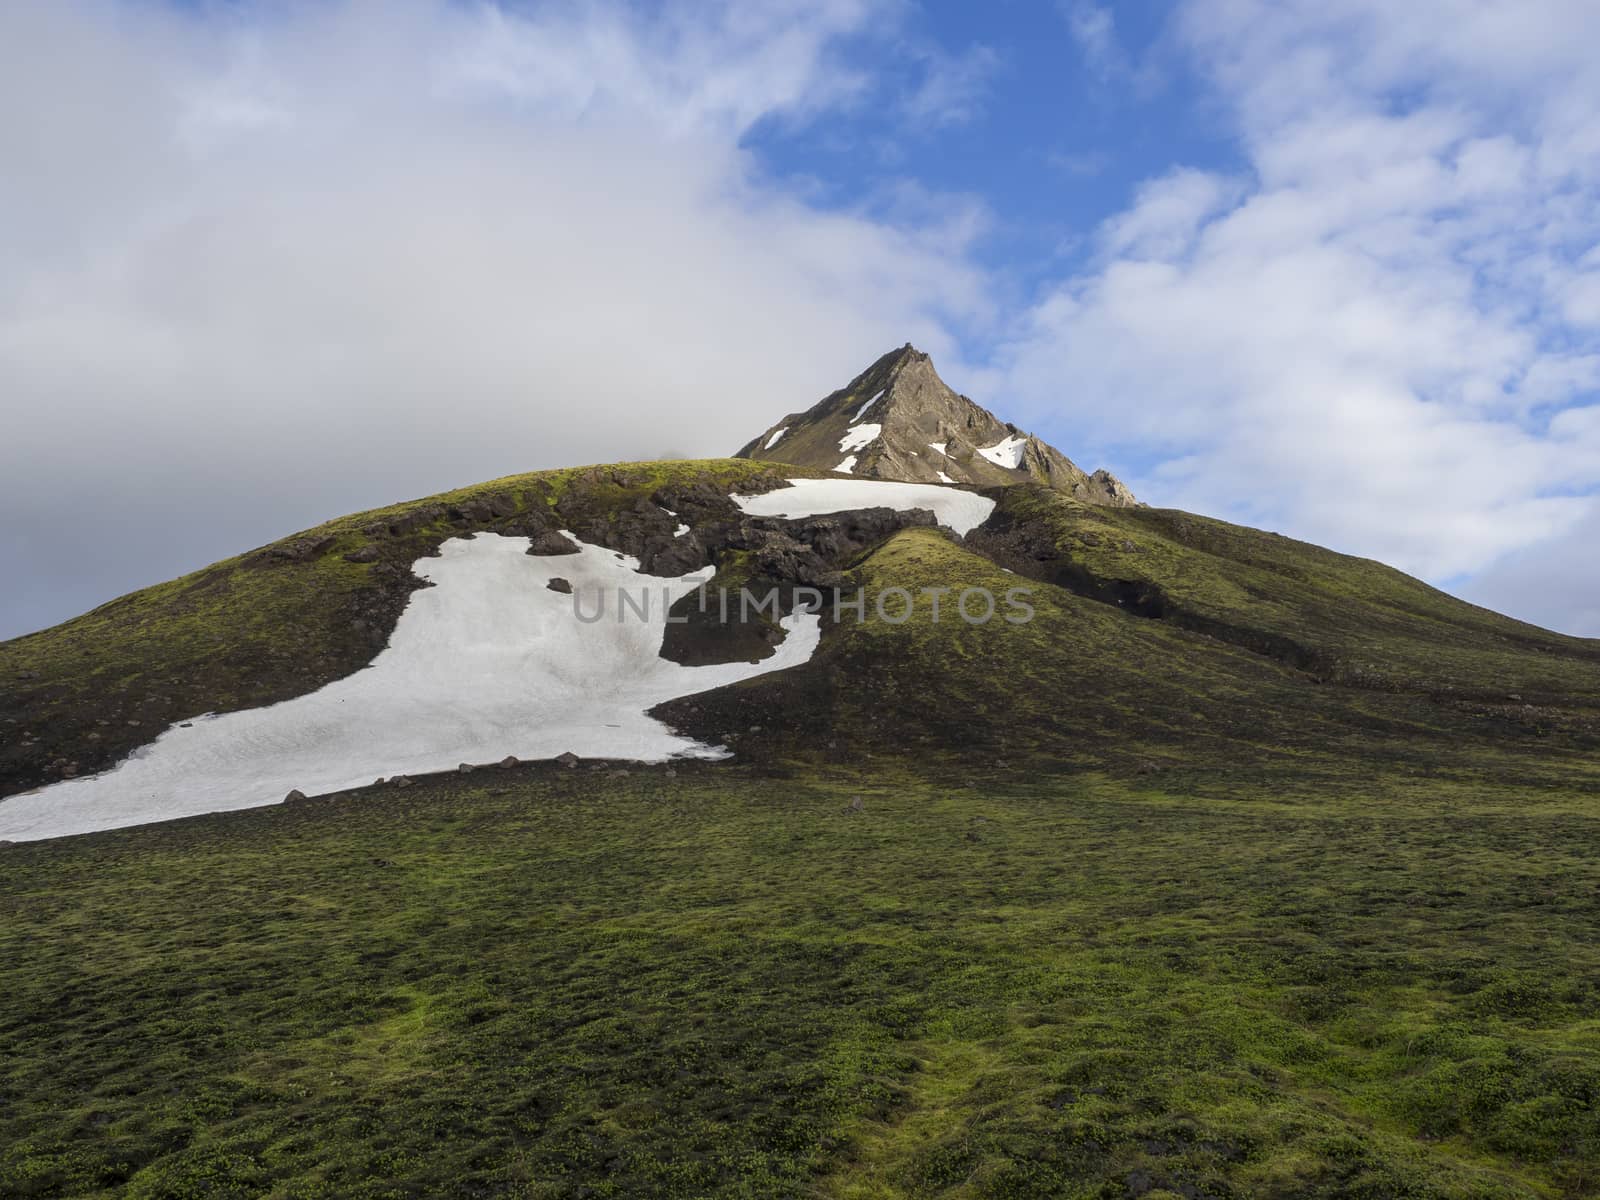 Landscape with snow capped mountain peak, pyramide shape in central highlands Iceland, blue sky white clouds, golden light